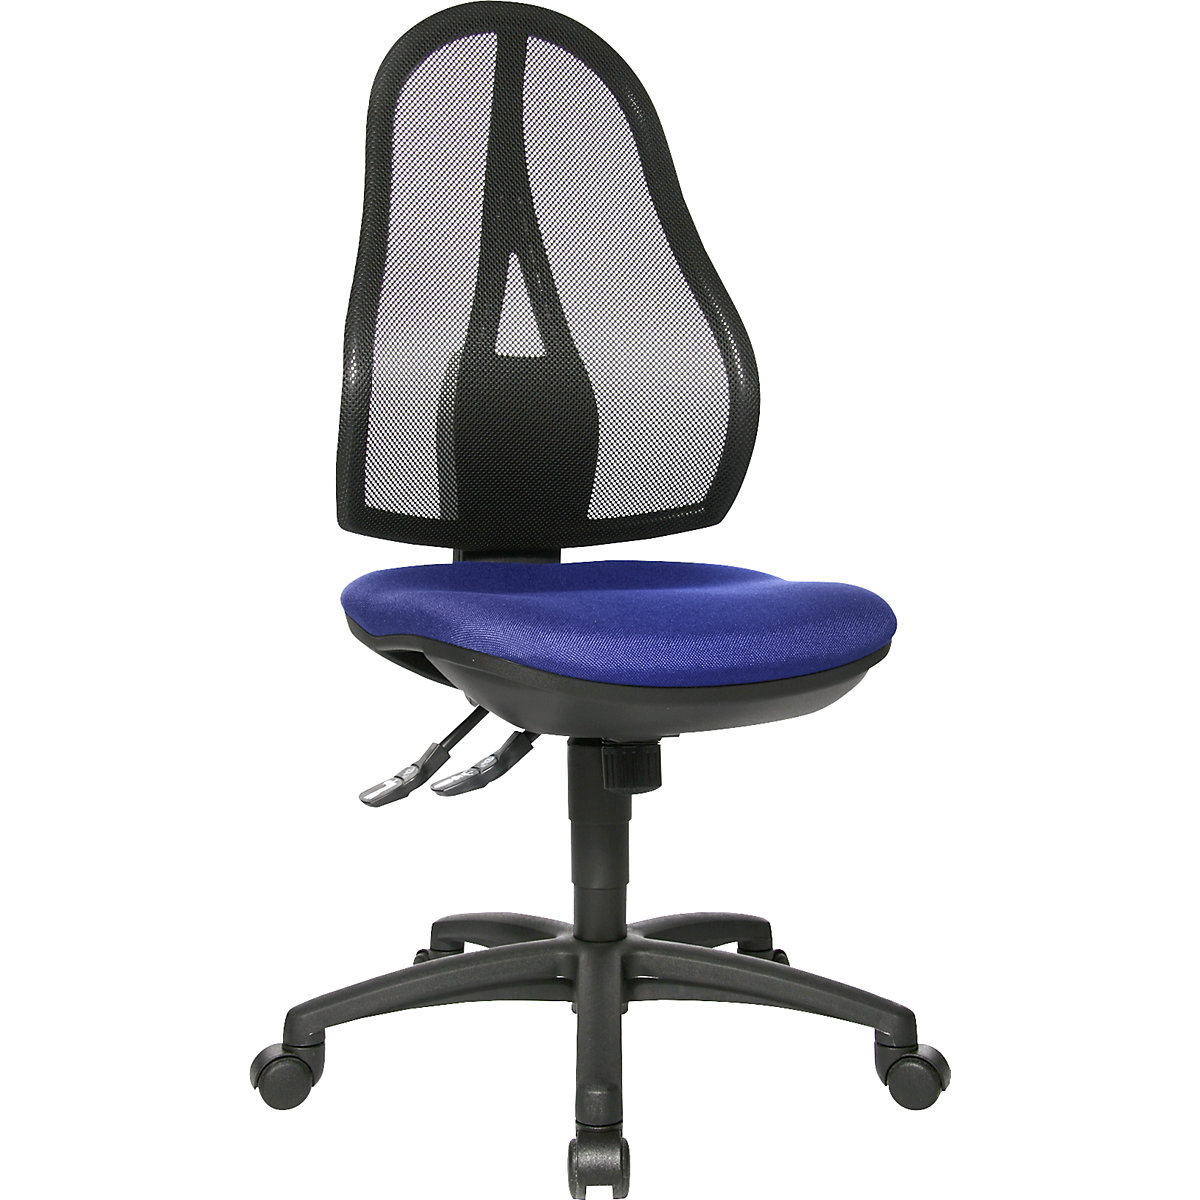 OPEN POINT SY office swivel chair – Topstar, without armrests, mesh back rest in black, royal blue covering-7